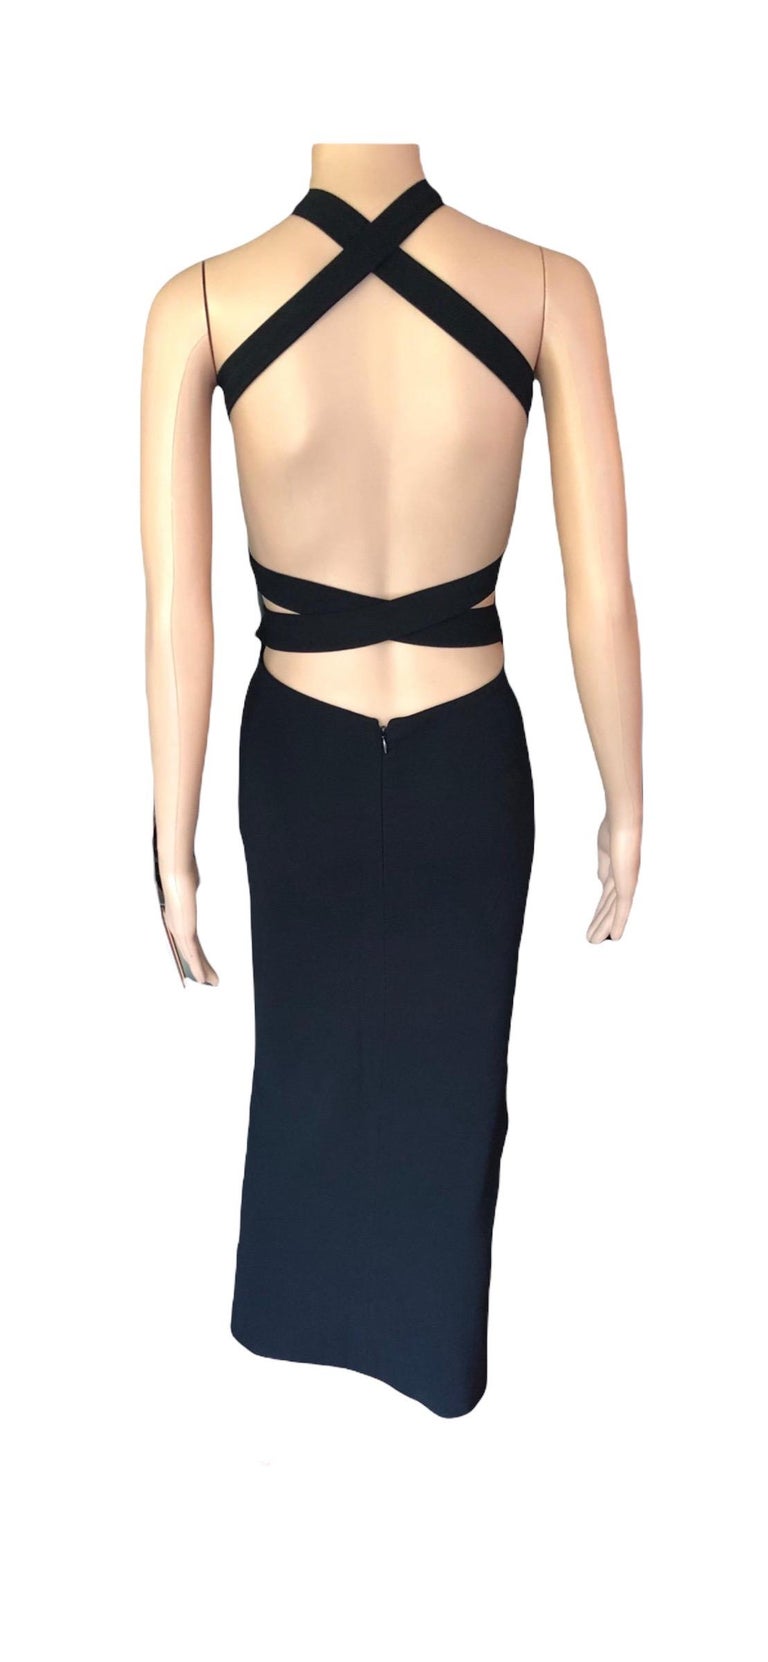 Dolce and Gabbana S/S 2001 Runway Backless Neck Tie Bodycon Black Dress ...